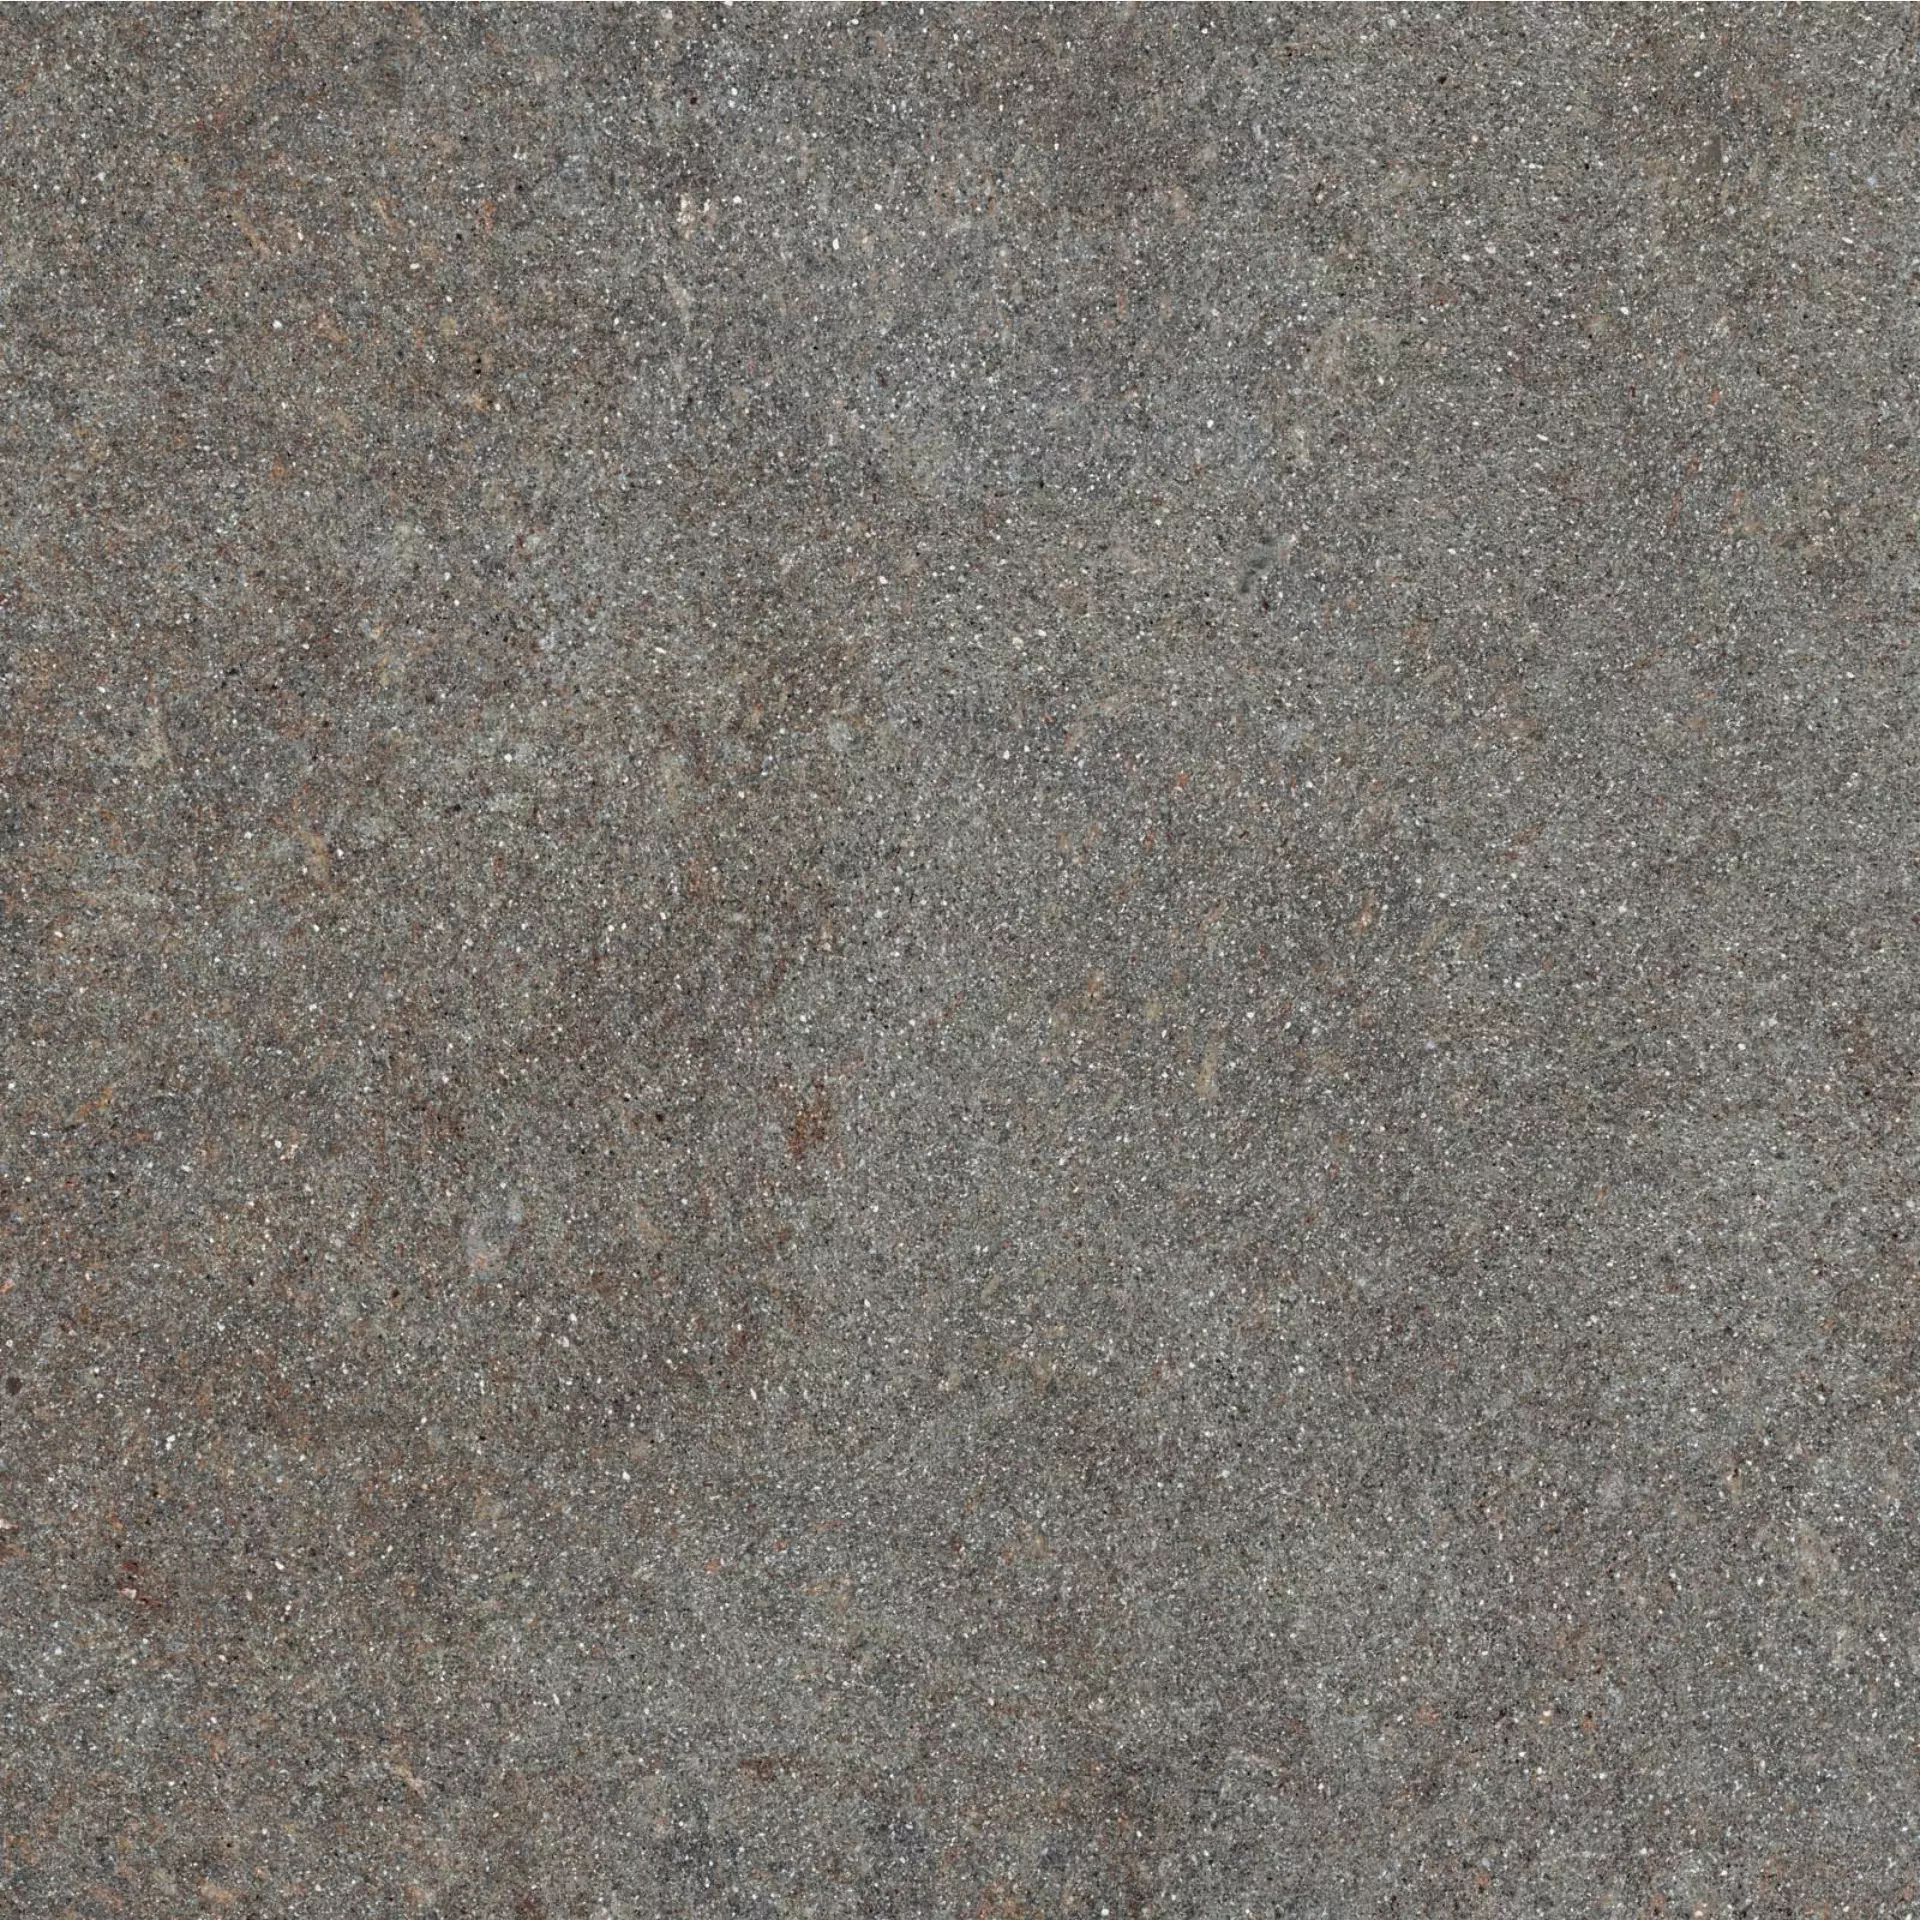 ABK Out.20 Native Fog Naturale Outdoor PF60004220 90x90cm rectified 20mm